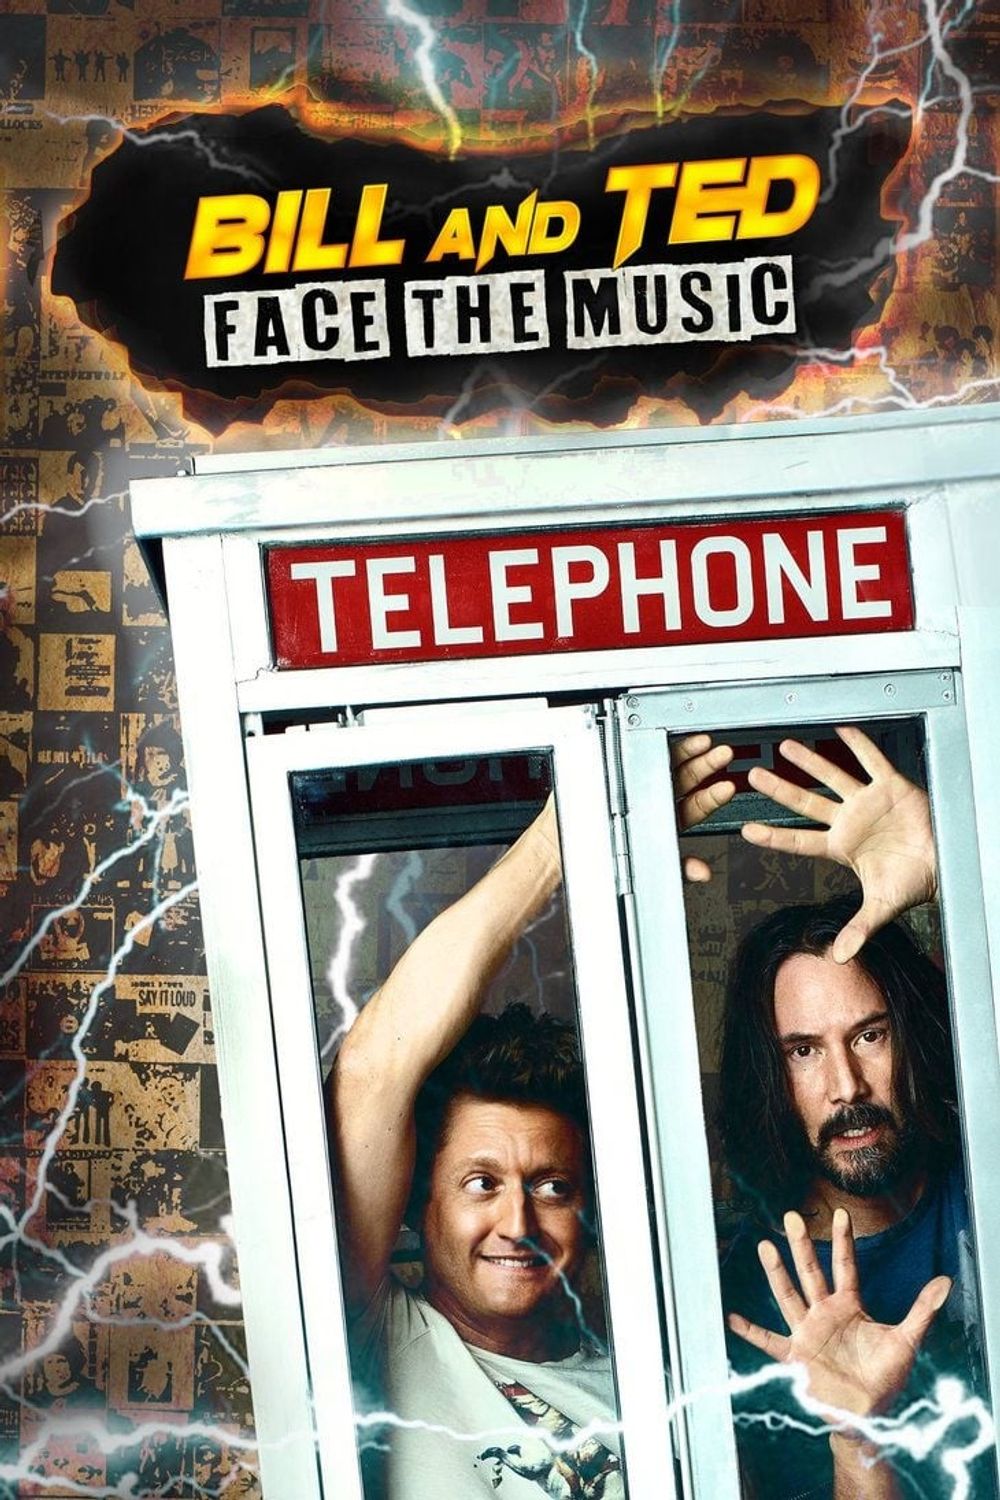 Bill & Ted Face The Music Cast, Actors, Producer, Director, Roles, Salary Stars Bio